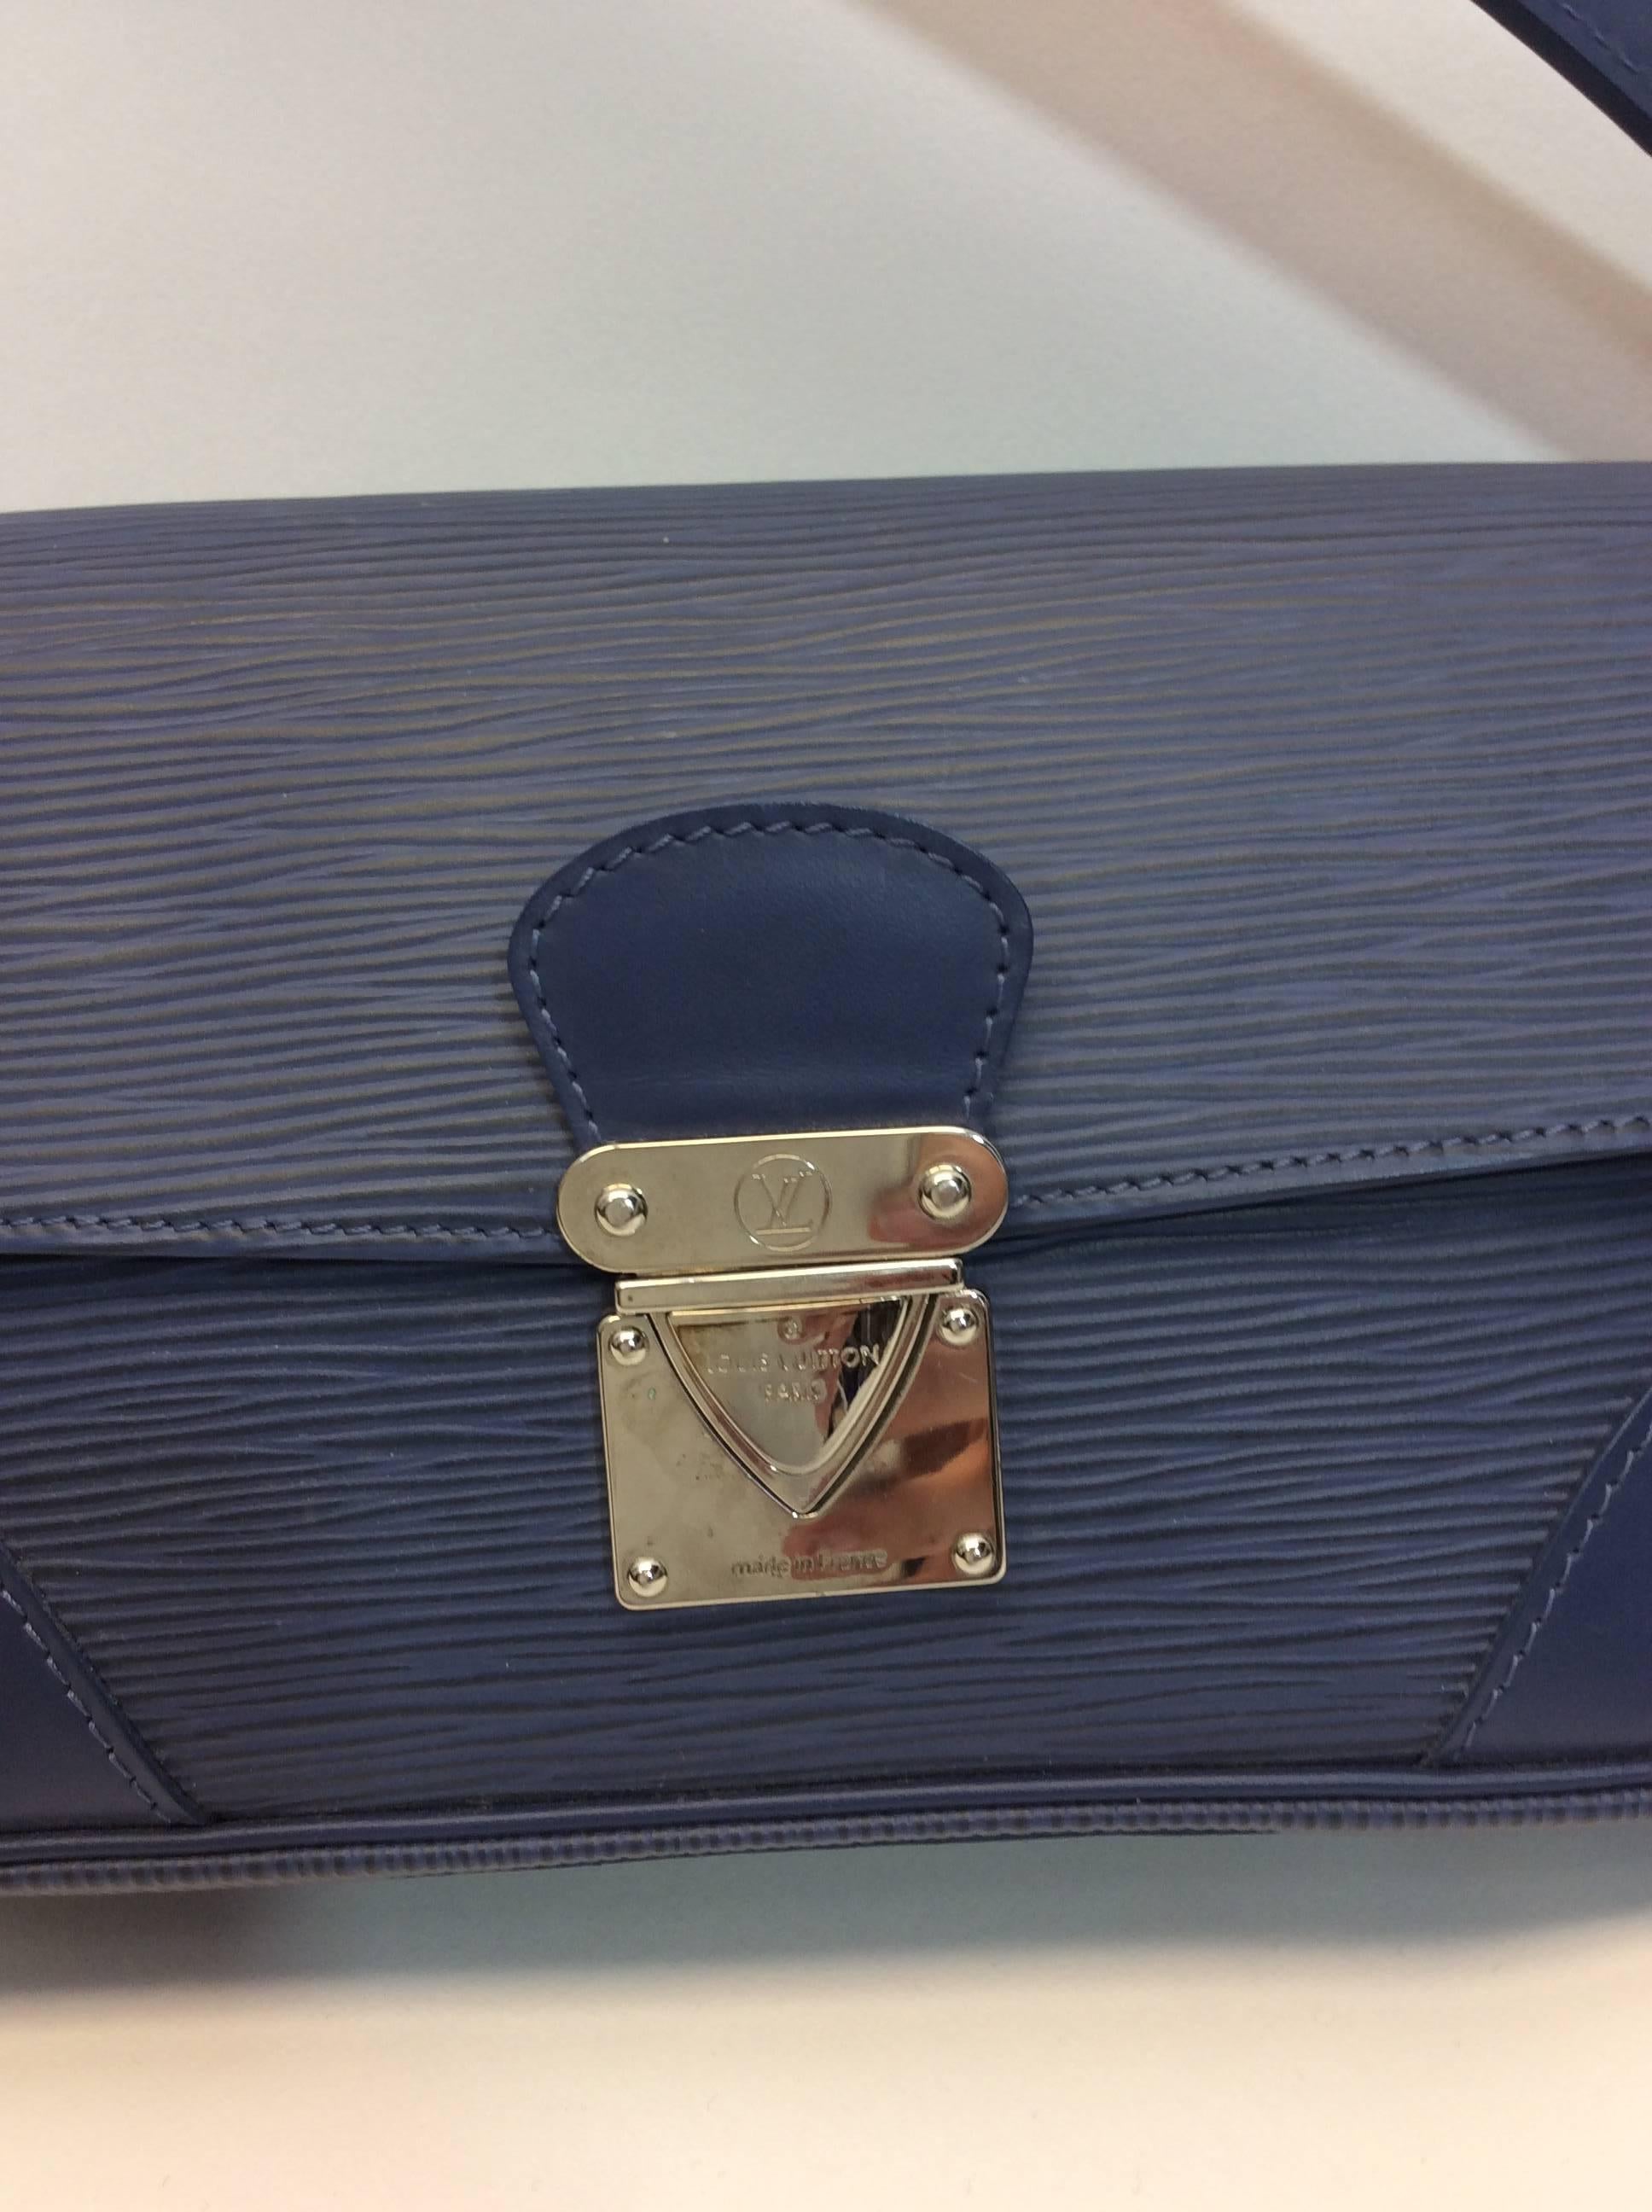 Louis Vuitton Epi Blue Leather Clutch In Excellent Condition For Sale In Narberth, PA